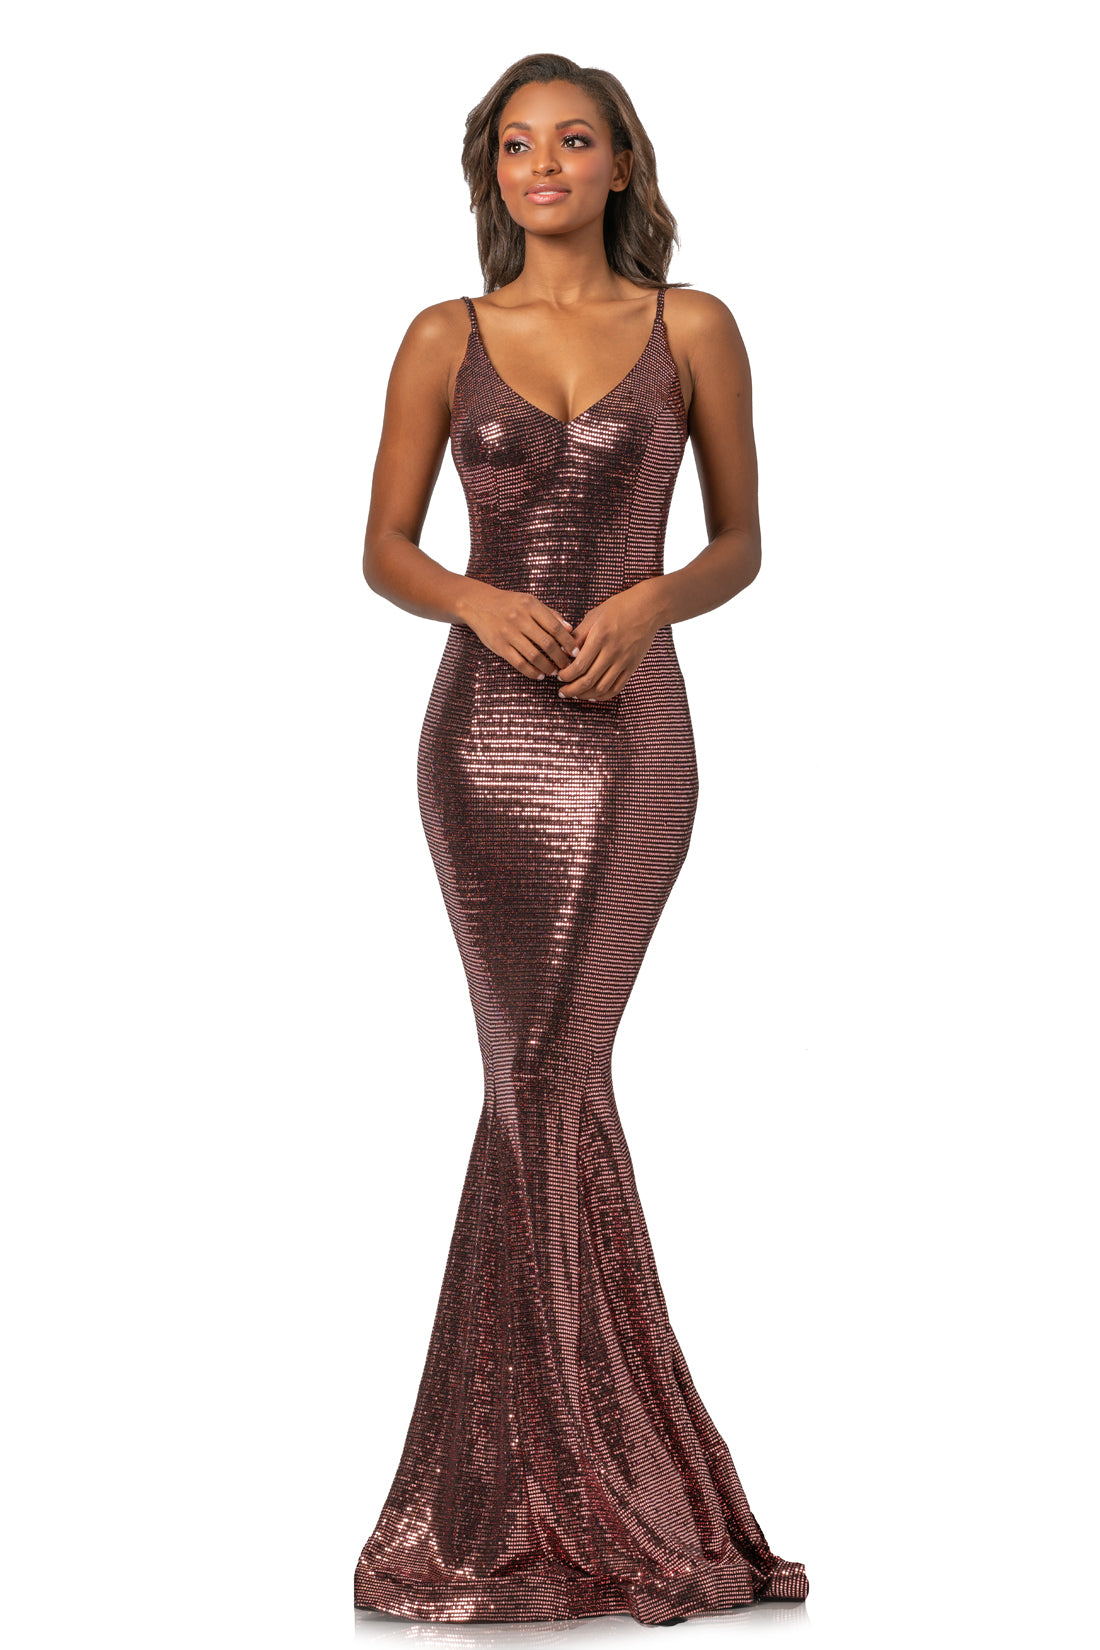 Johnathan Kayne 2087 is Metallic Sequins Prom Dress, Pageant Gown & Formal Evening Wear.  This Long Fitted Metallic sequin Shimmer Prom Dress has a v neckline with spaghetti straps and Open V back. Fit & Flare Mermaid Silhouette with small train.